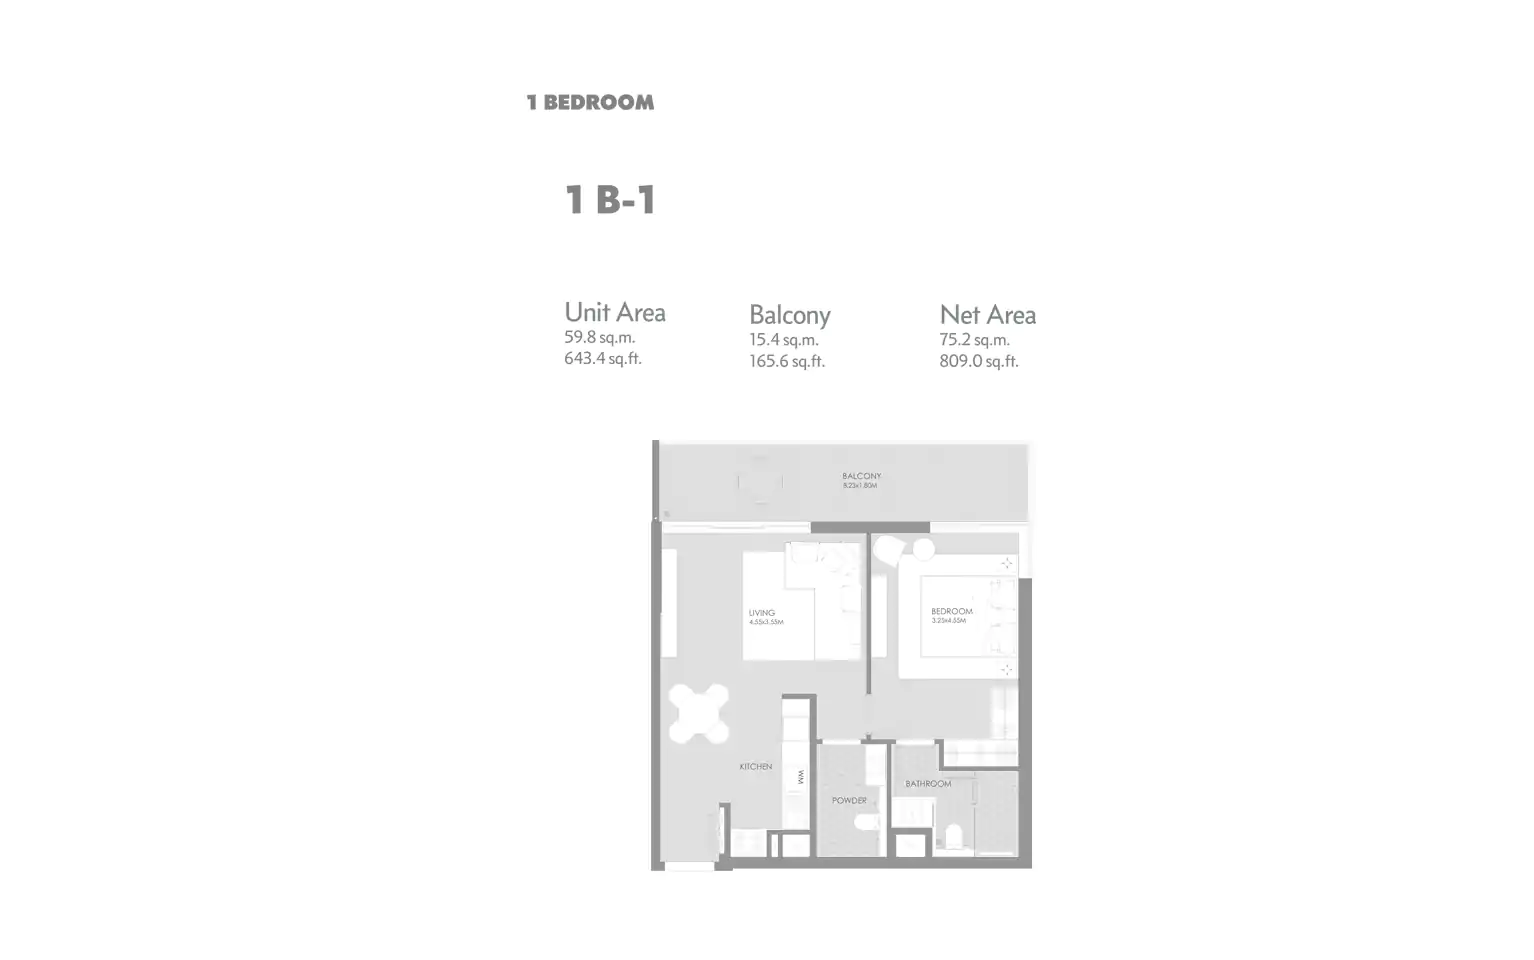 1 Bedroom with Balcony B-1, Size : 643.4 Sq.ft.